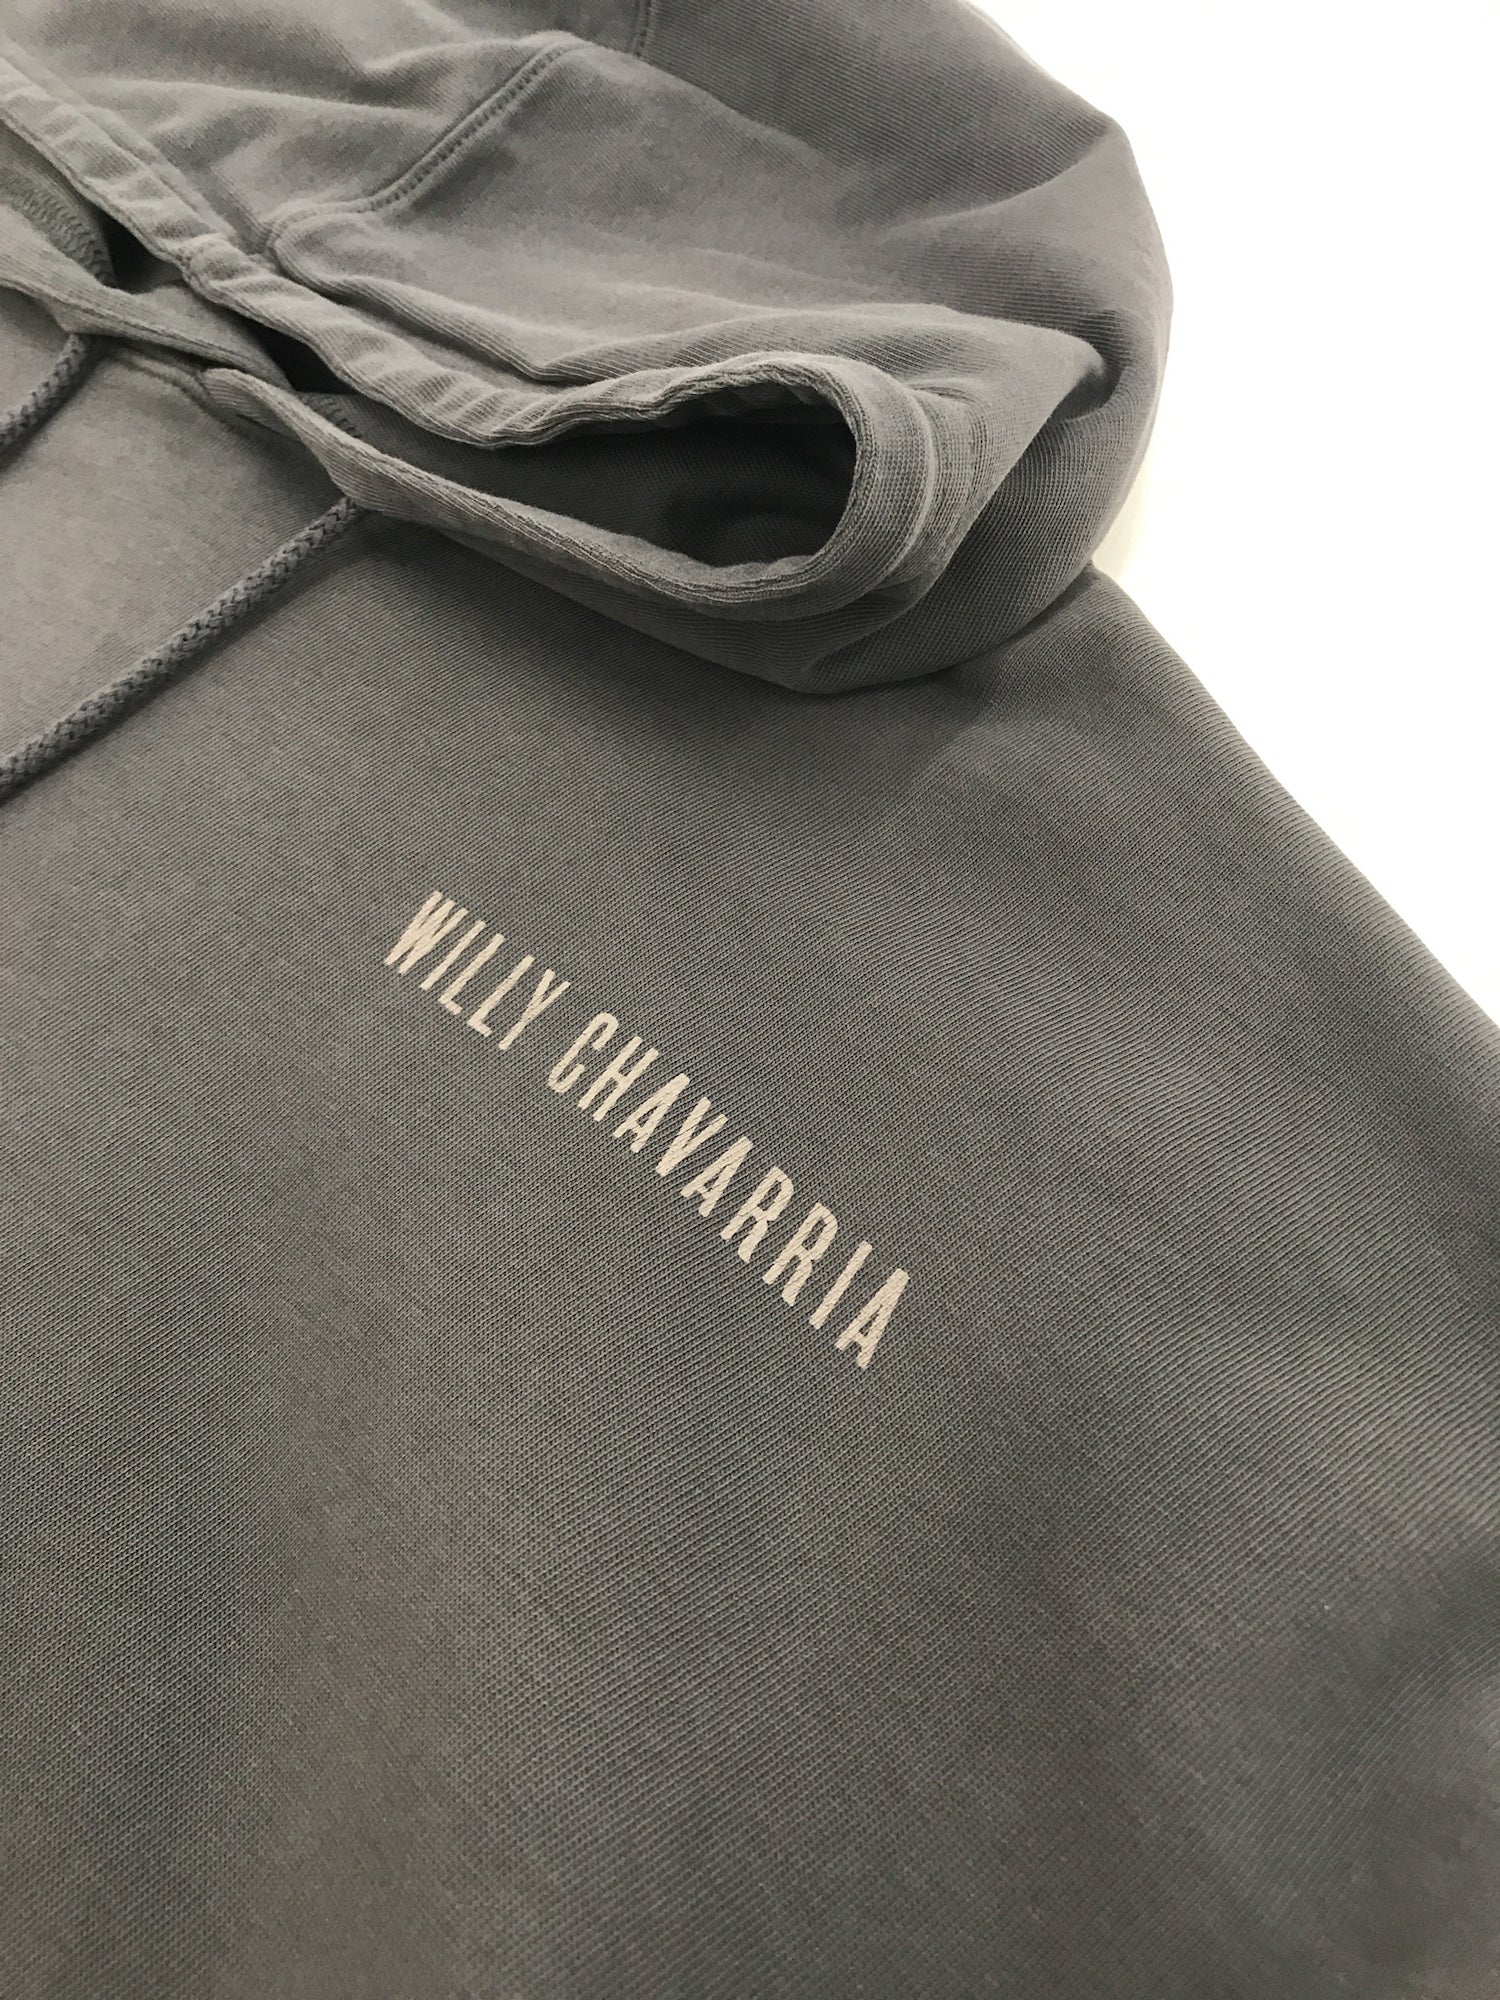 WILLY CHAVARRIA NEW HOODIE